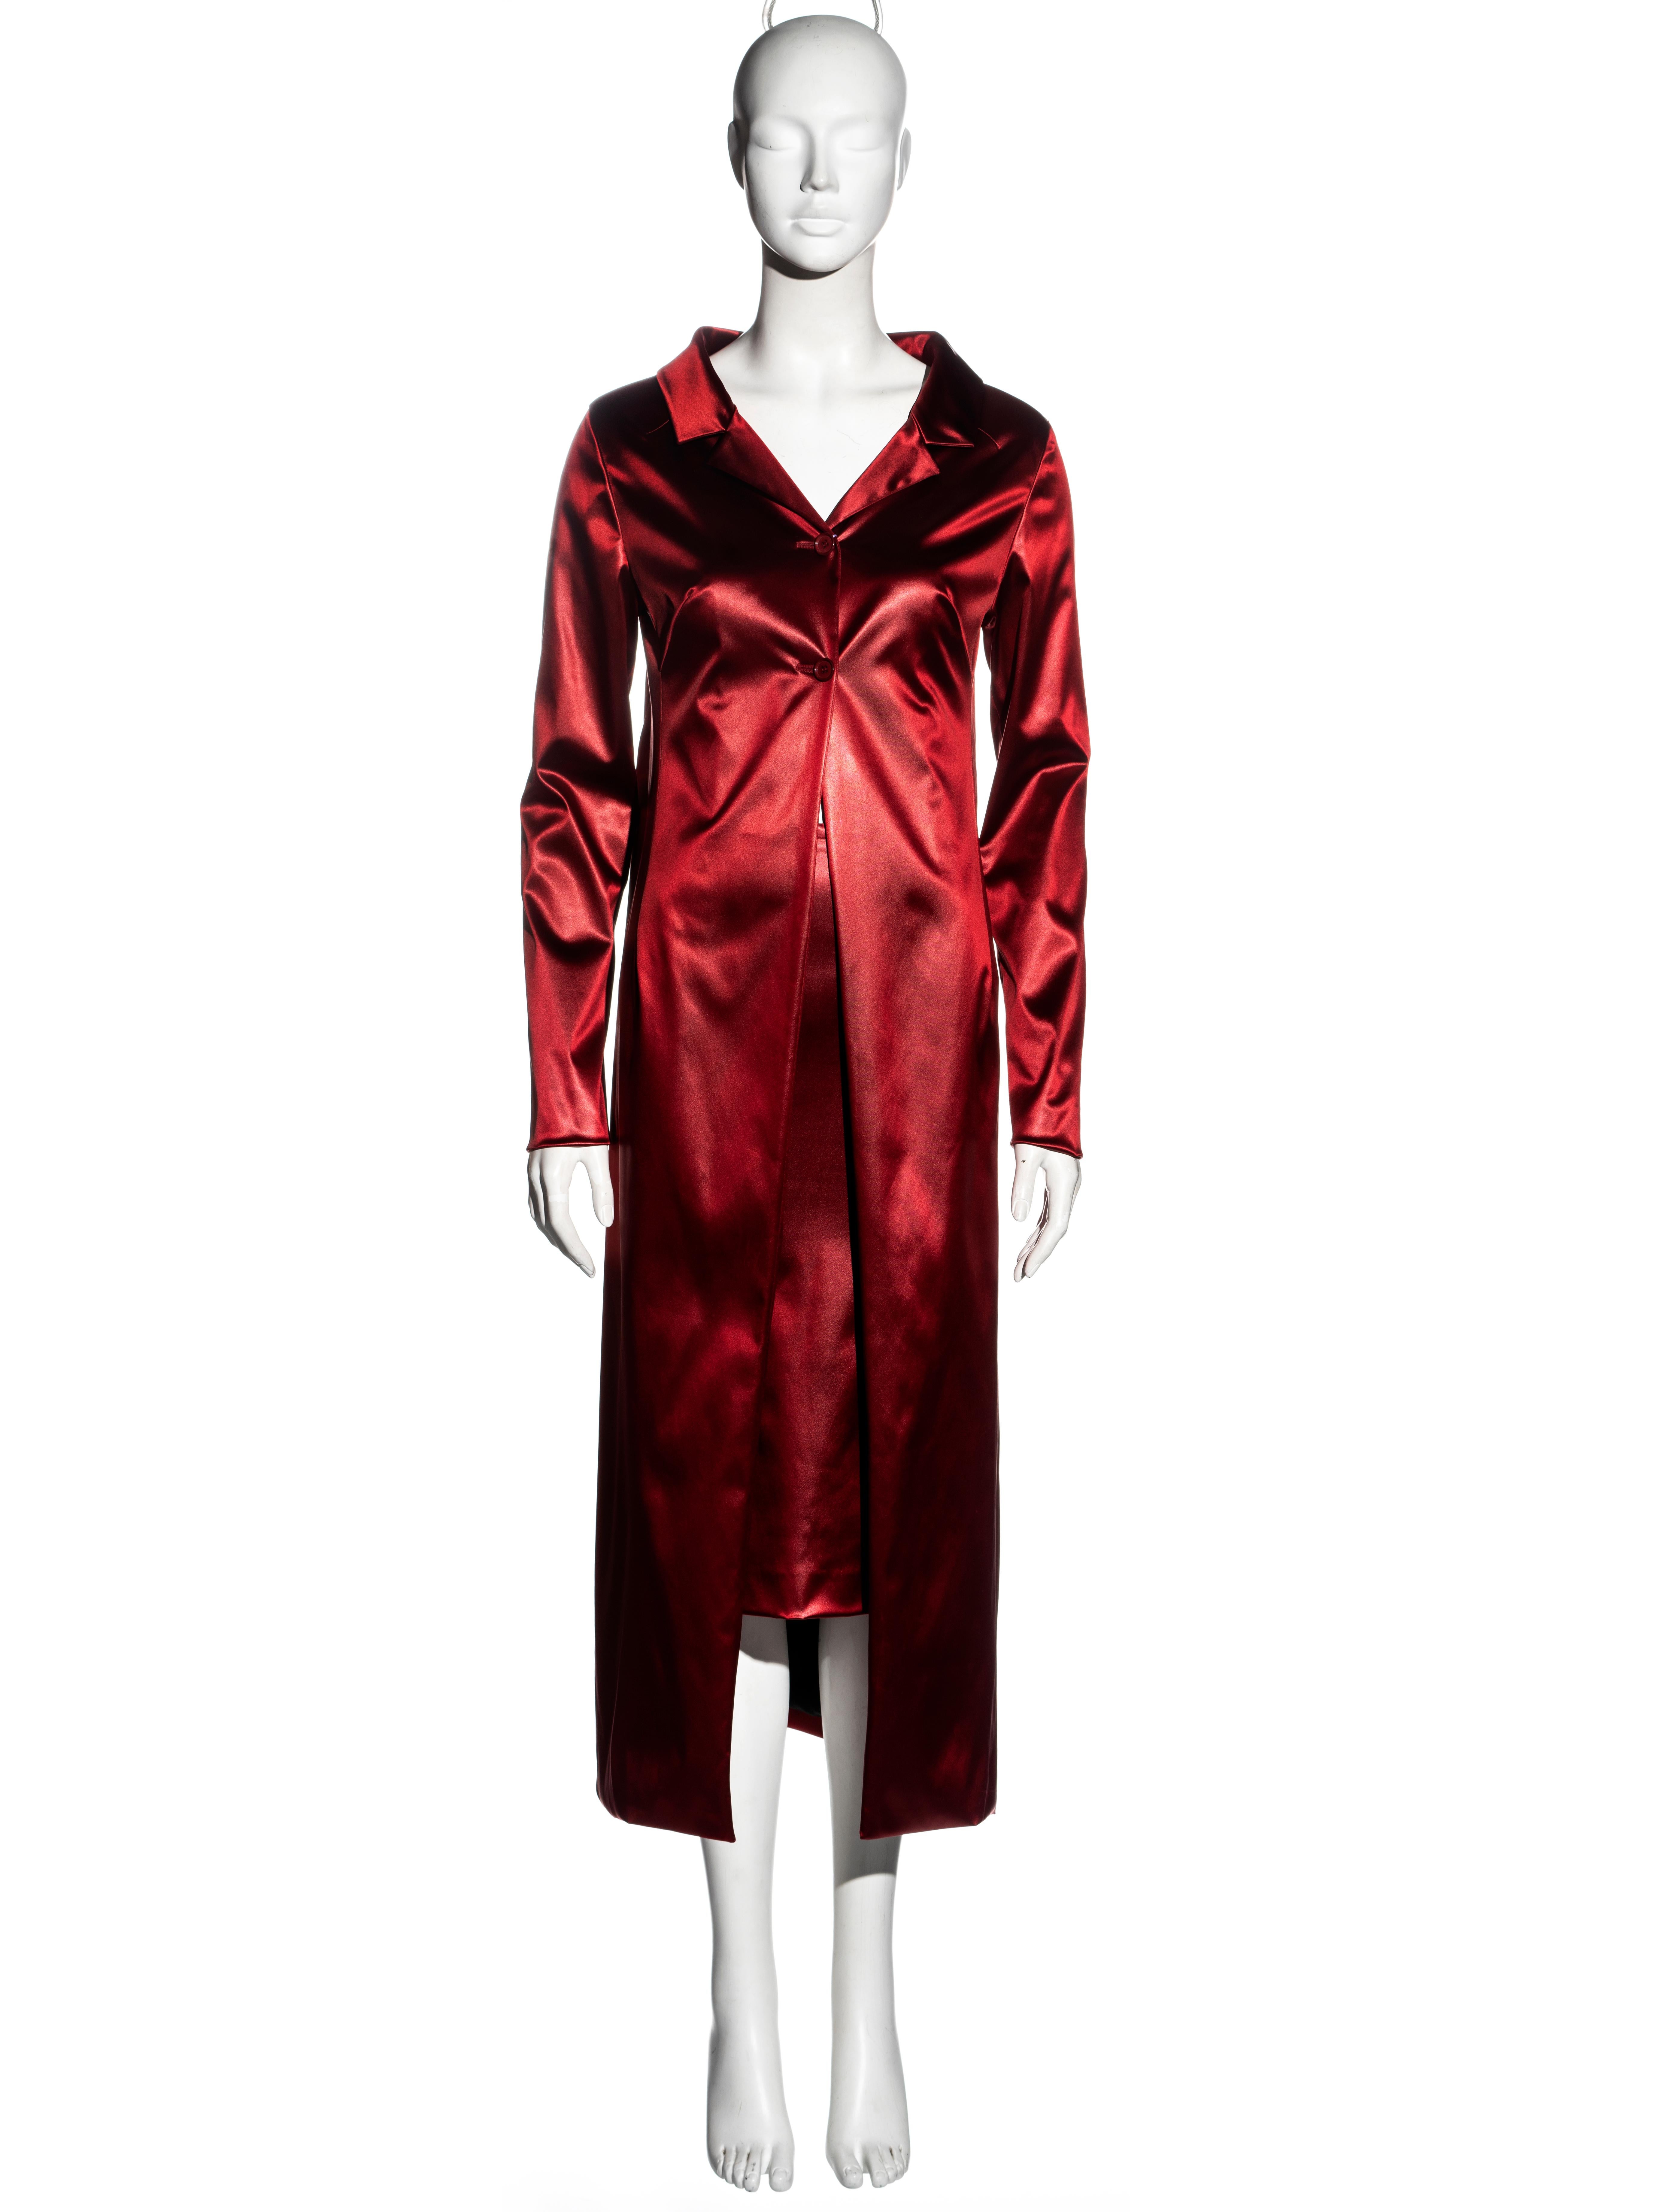 ▪ Dolce & Gabbana coat and skirt set
▪ Red stretch-satin 
▪ Mid-length coat with a two-button closure at the bust 
▪ Notched lapels
▪ Matching knee-length skirt 
▪ Coat: IT 40 - FR 36 - UK 8 - US 4
▪ Skirt: IT 38 - FR 34 - UK 6 - US 2
▪